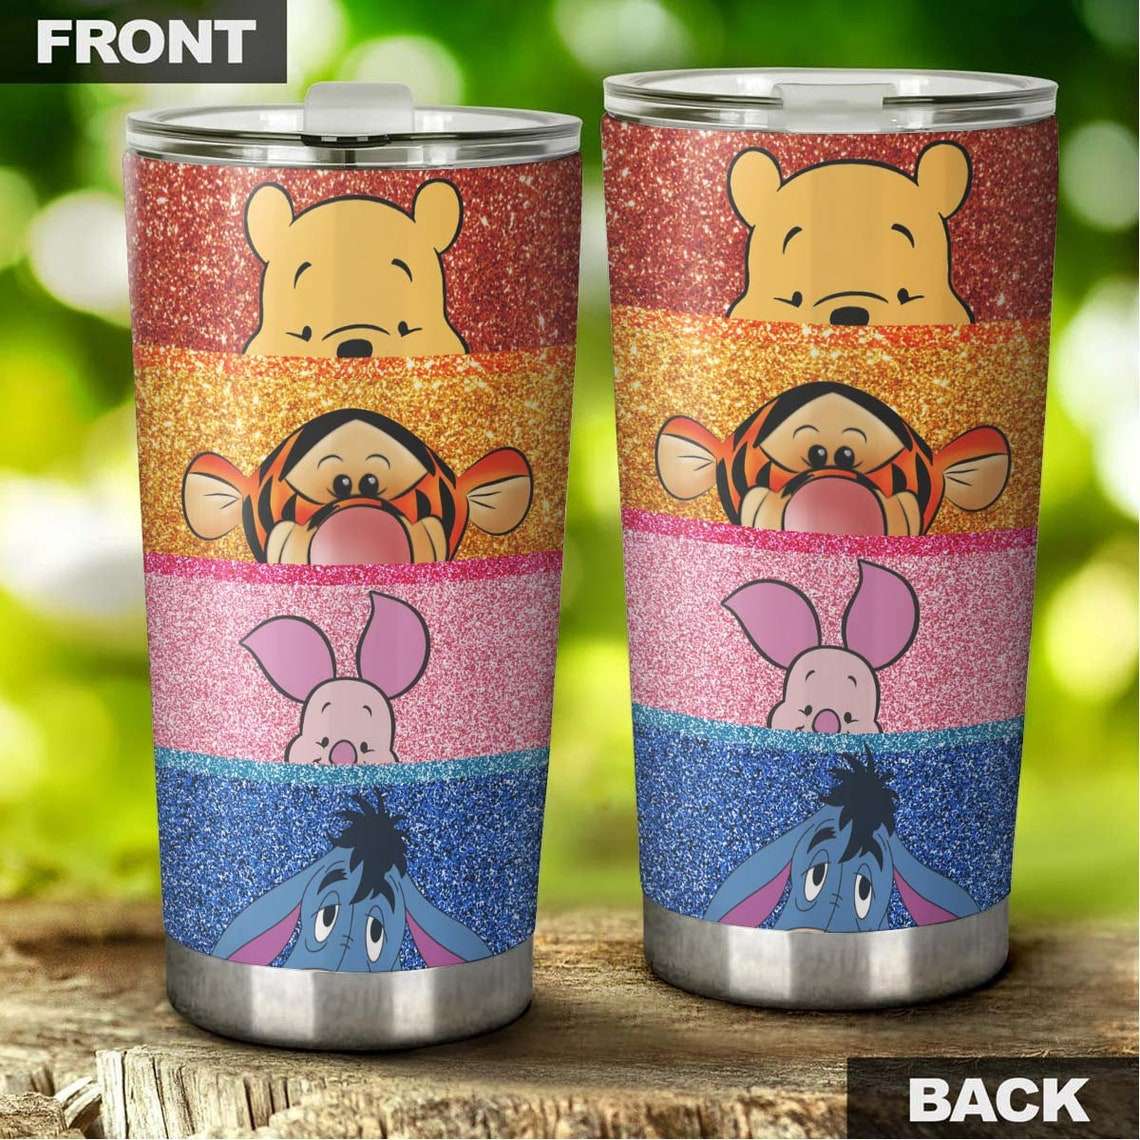 Cartoon Movie Winnie The Pooh Colorful Glitter Stainless Steel Tumbler For Disney Fan D29qx8